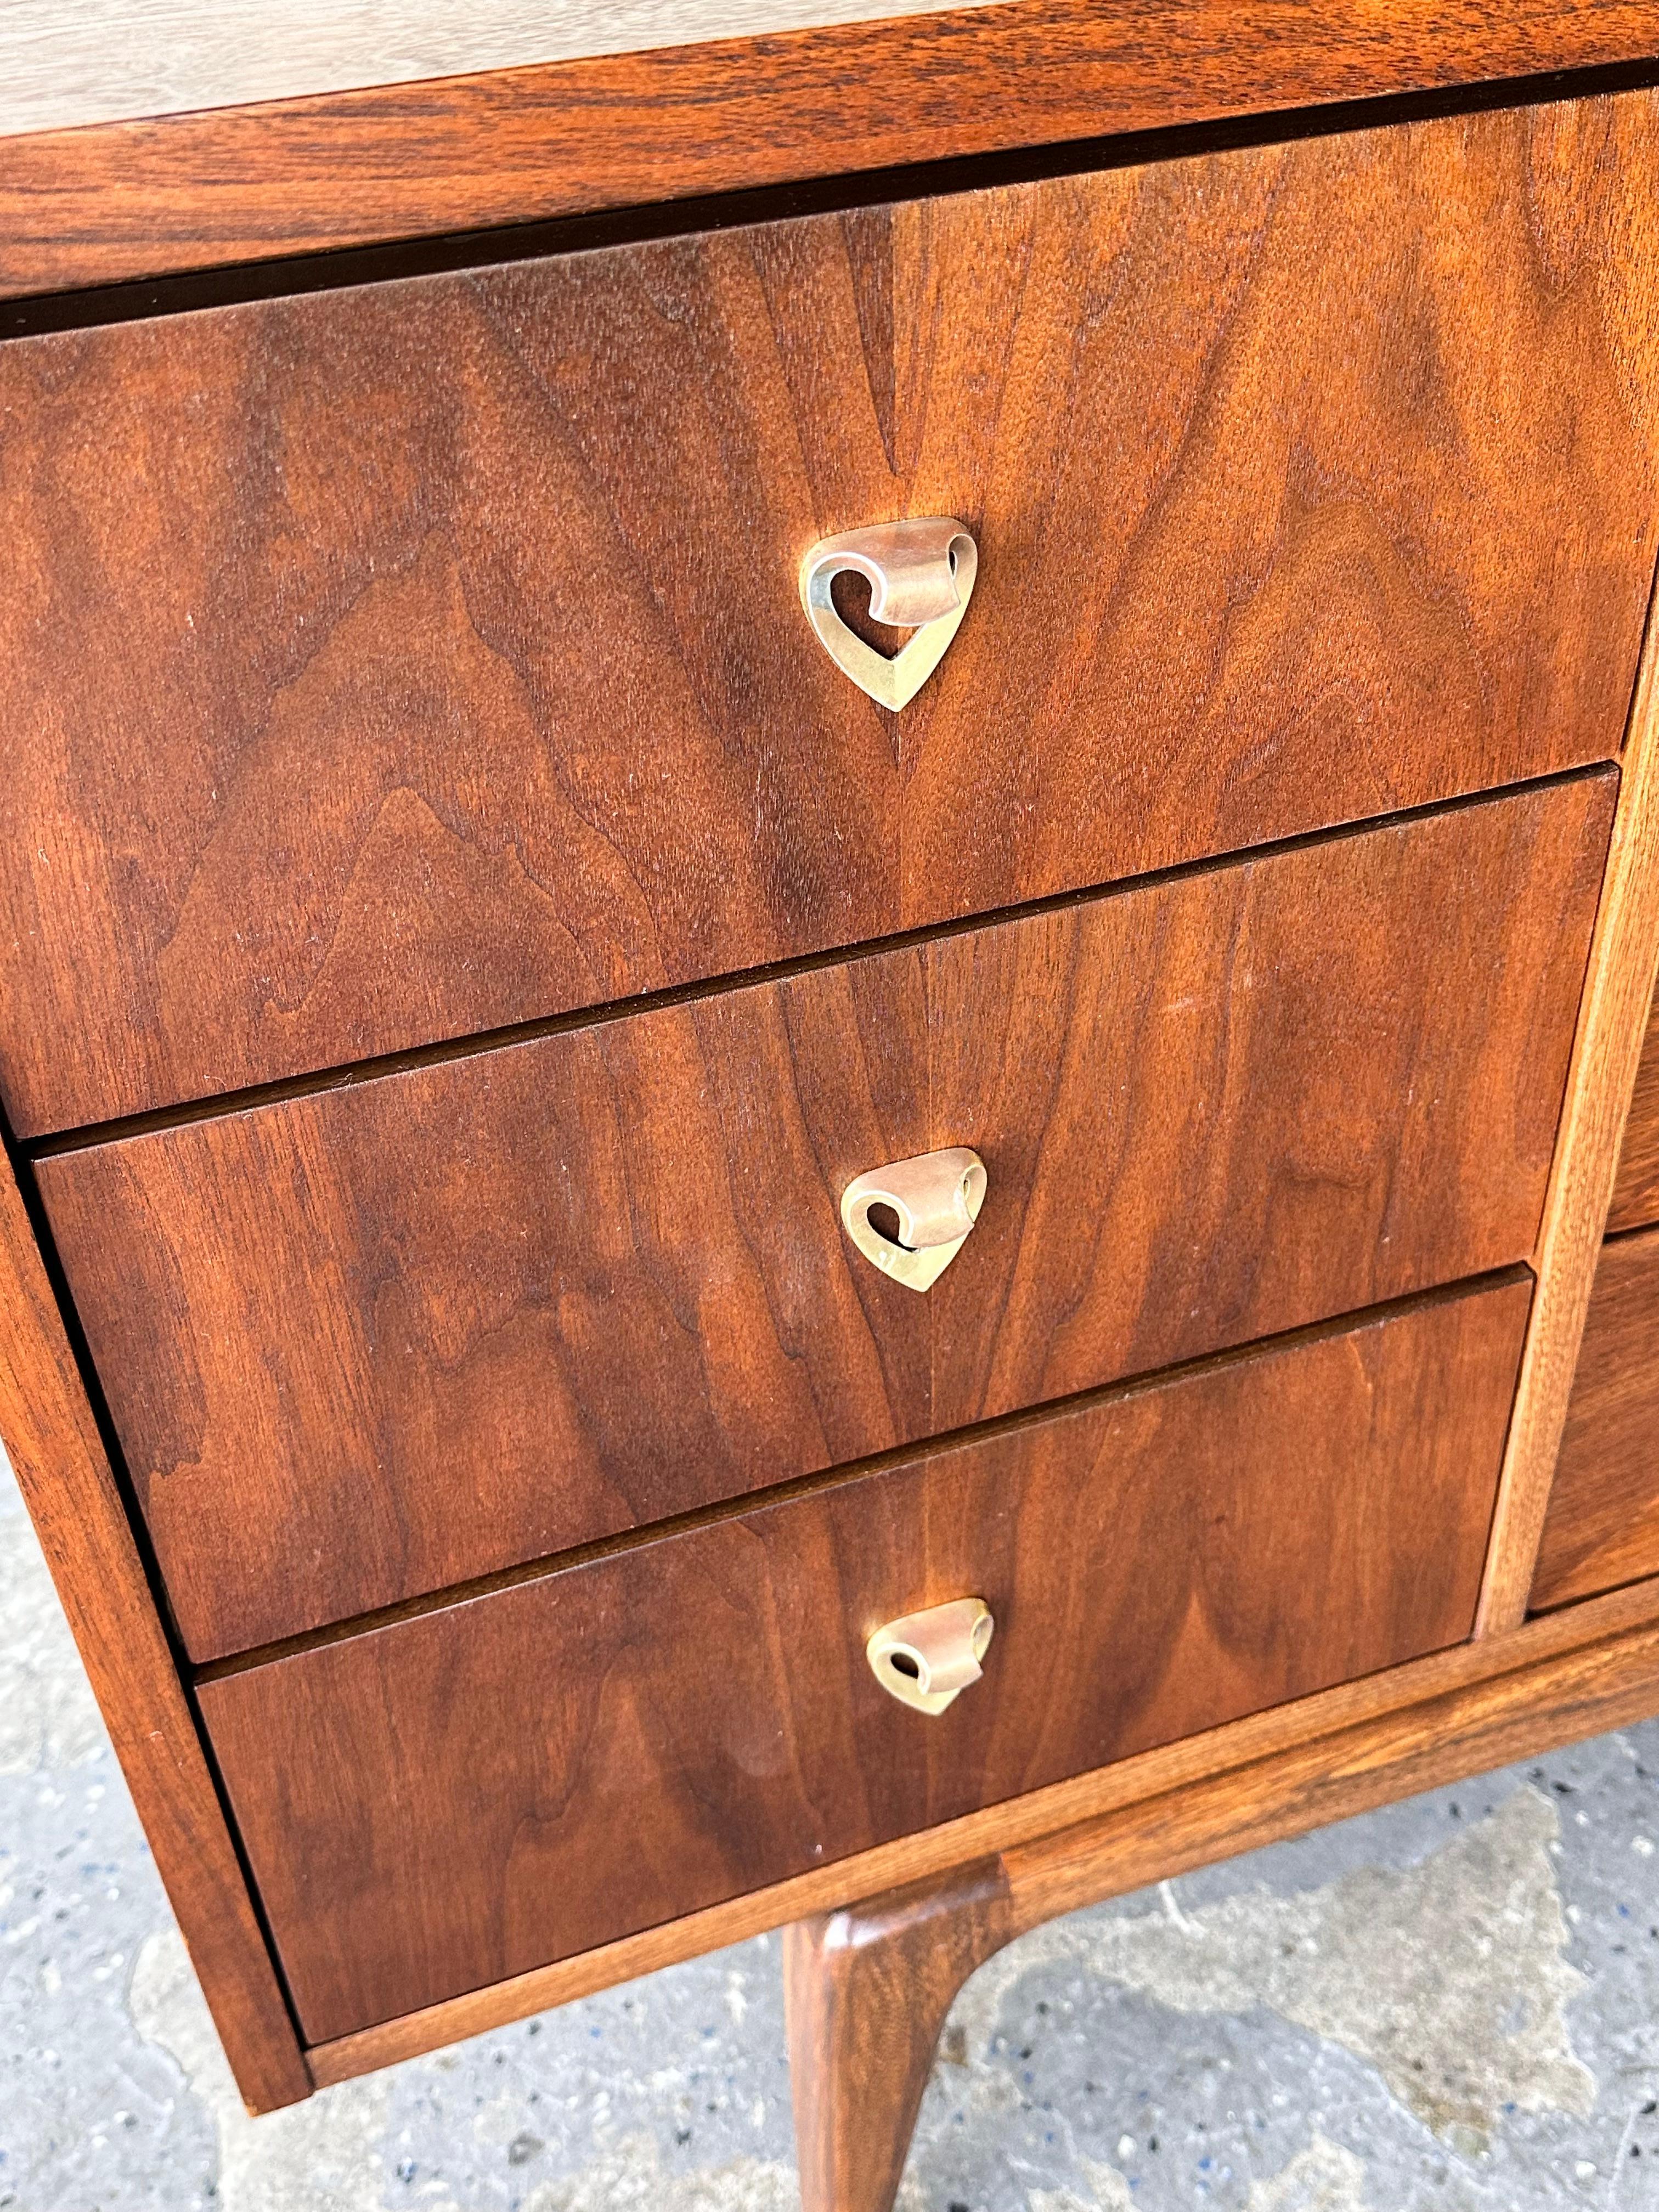 This mid century lowboy dresser features original walnut finish, 6 drawer design, diamond shaped drawers, and a brass accented drawer pulls. Matching highboy available separately. 


Dimensions: 54.25 inch wide 19.25 inch deep 30.5 inch